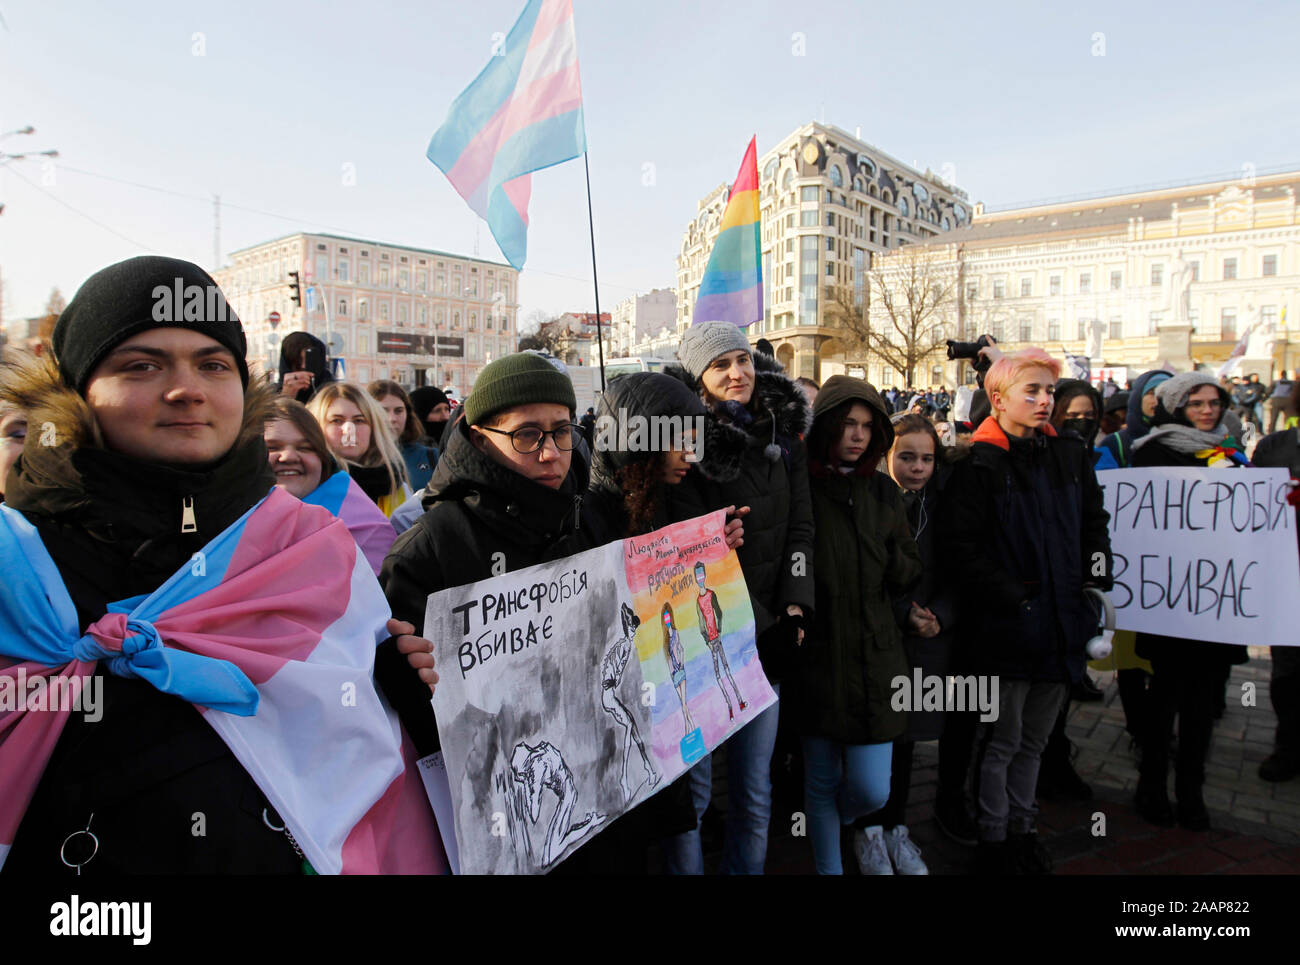 Far-right activist hold placards and flags during the march.Transgender rights activists in Ukraine’s capital Kyiv held a march to mark Transgender Day of Remembrance. In 2018, the police failed to protect those participating in a similar march from attacks by violent groups advocating hatred and discrimination. This year, there is a serious risk of new attacks and the police must ensure people can safely exercise their rights to freedom of peaceful assembly and expression without discrimination. Stock Photo